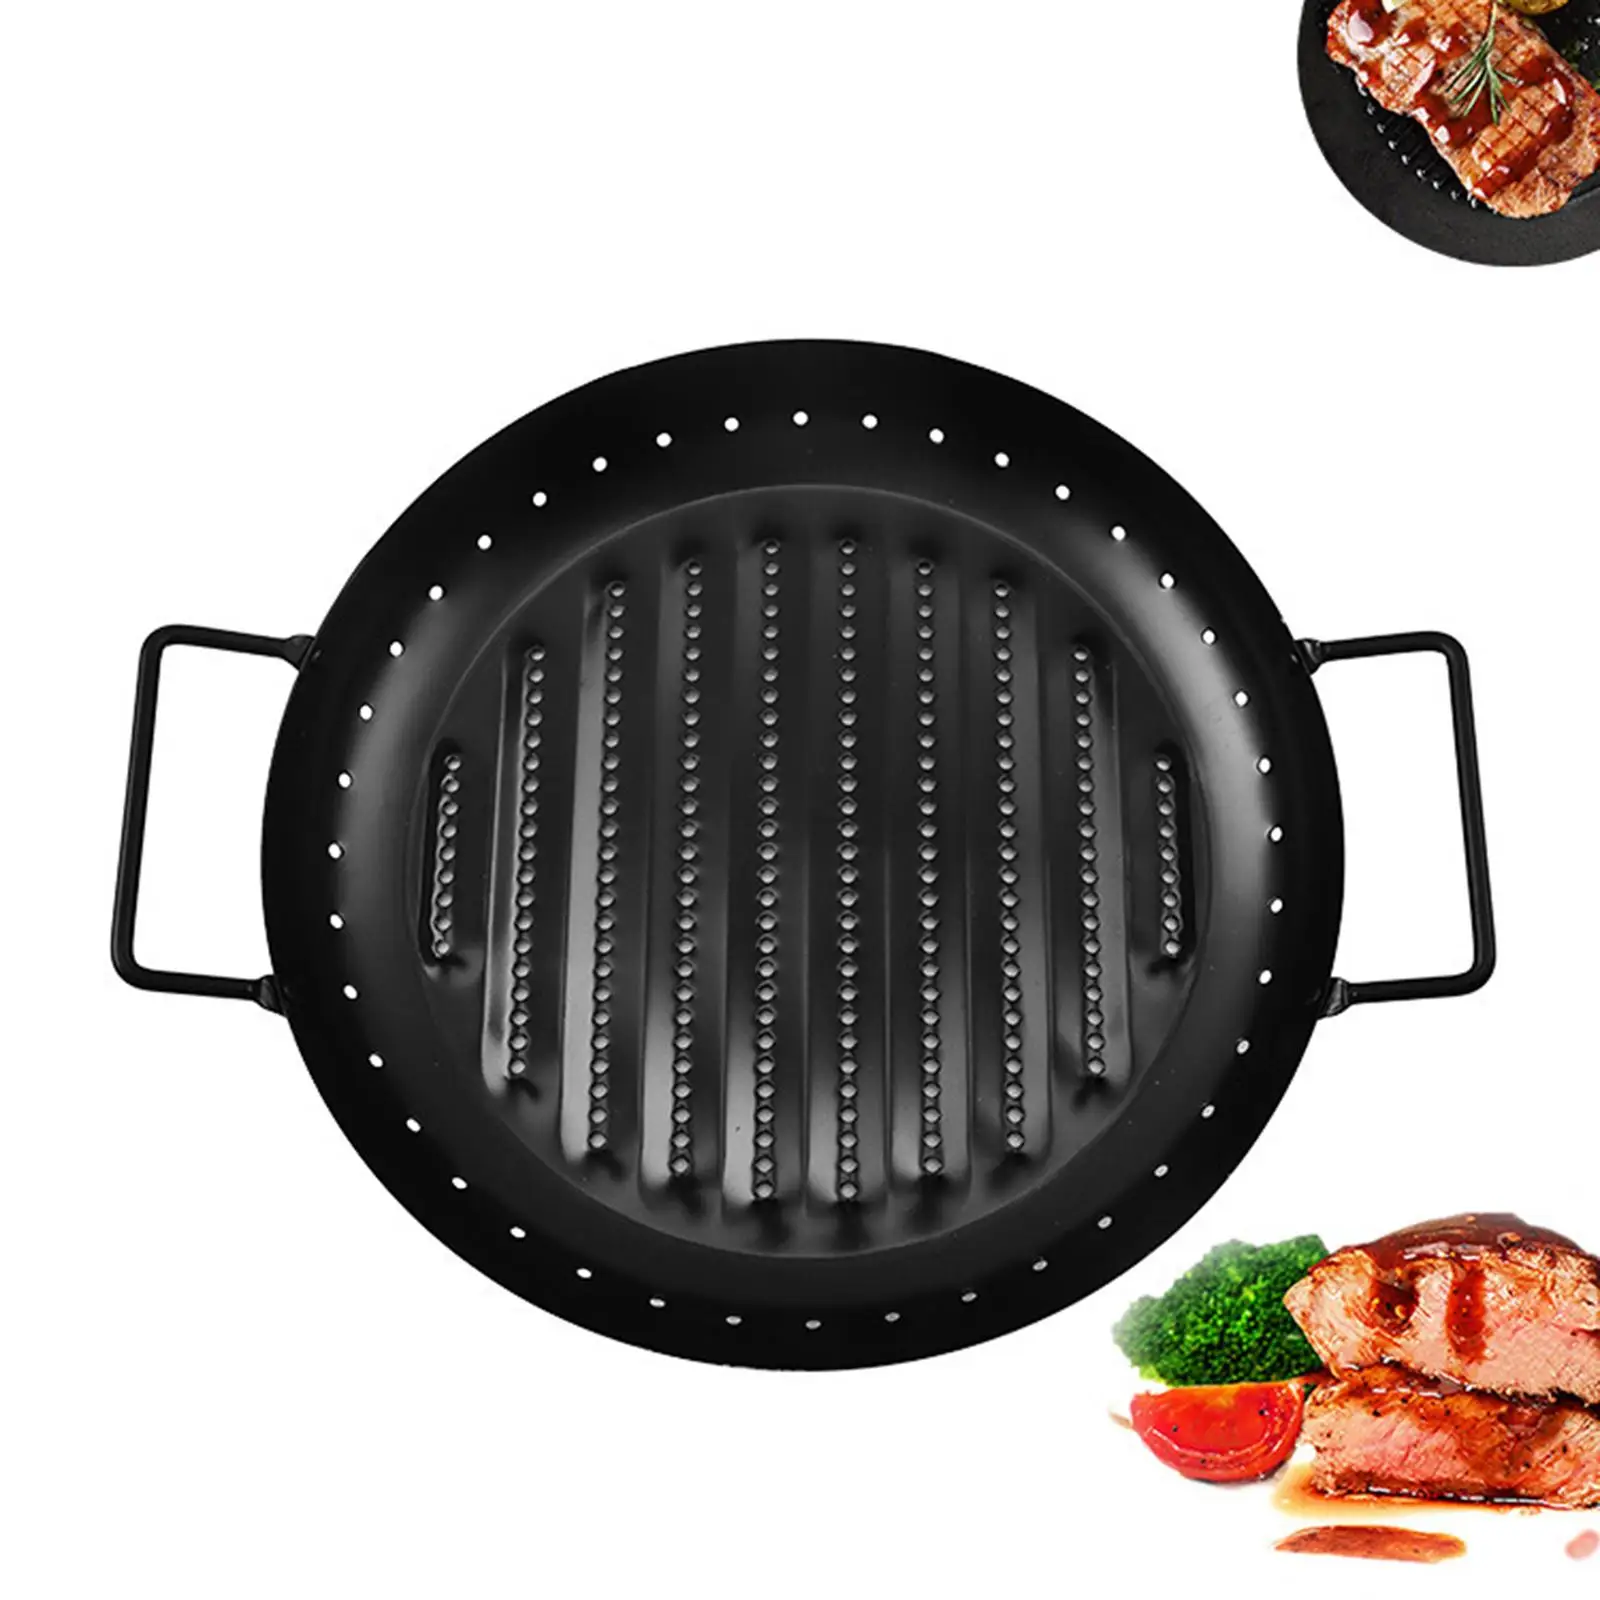 Grill Pans Barbecue Grilling Baskets for Baking Restaurant Indoor Outdoor